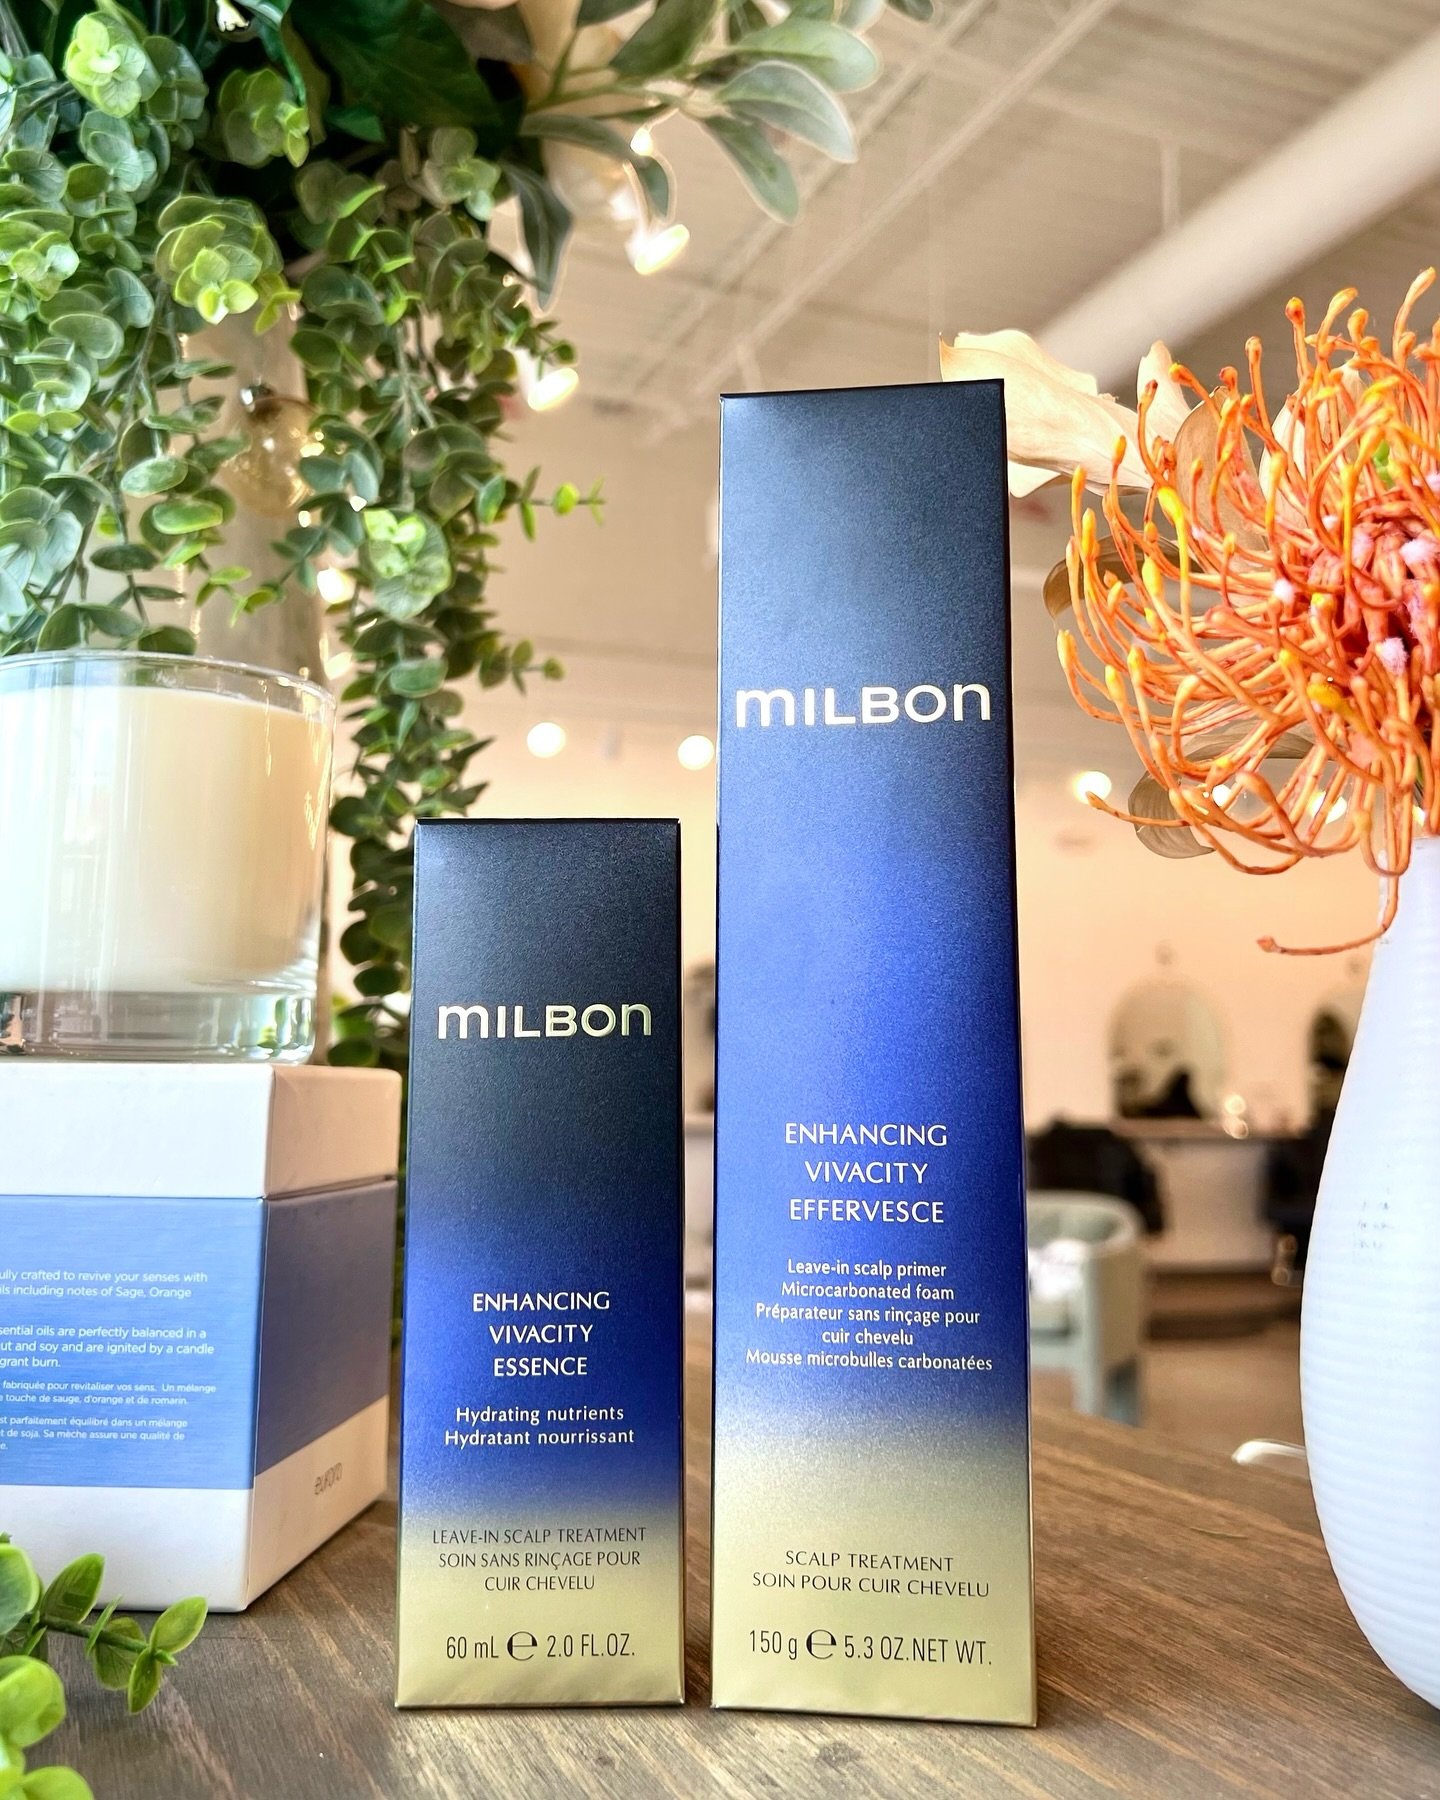 Hey girl 👋 Let&rsquo;s talk about thinning hair and all of the amazing technology we have to help slow and even reverse hair thinning and loss. 

These products been scientifically proven and salon-guest approved 💆🏻&zwj;♀️

Combine this powerful d